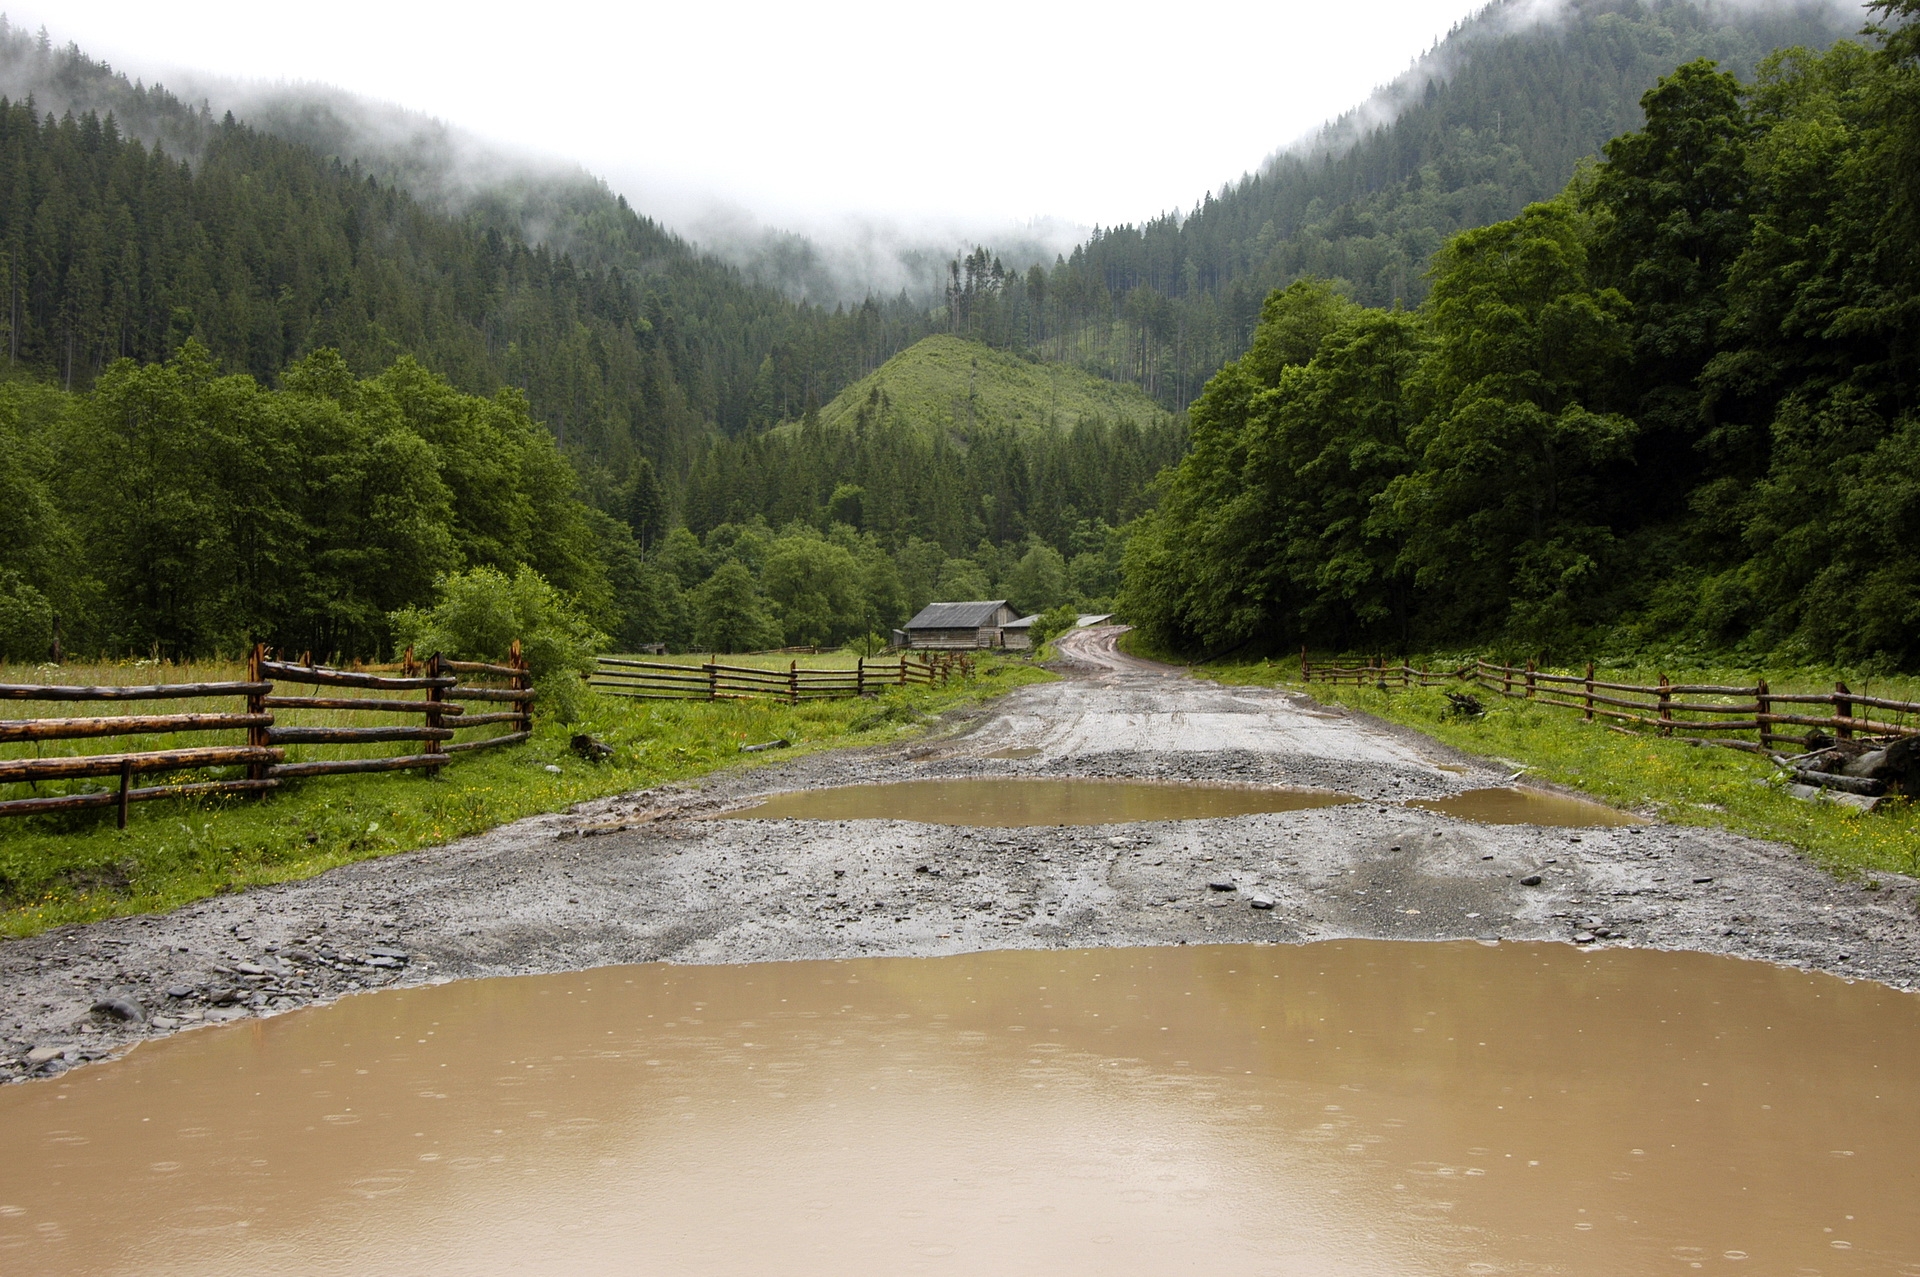 rain, nature, mountains, road, small house, lodge, country, ukraine, puddles, countryside, carpathians, bumps